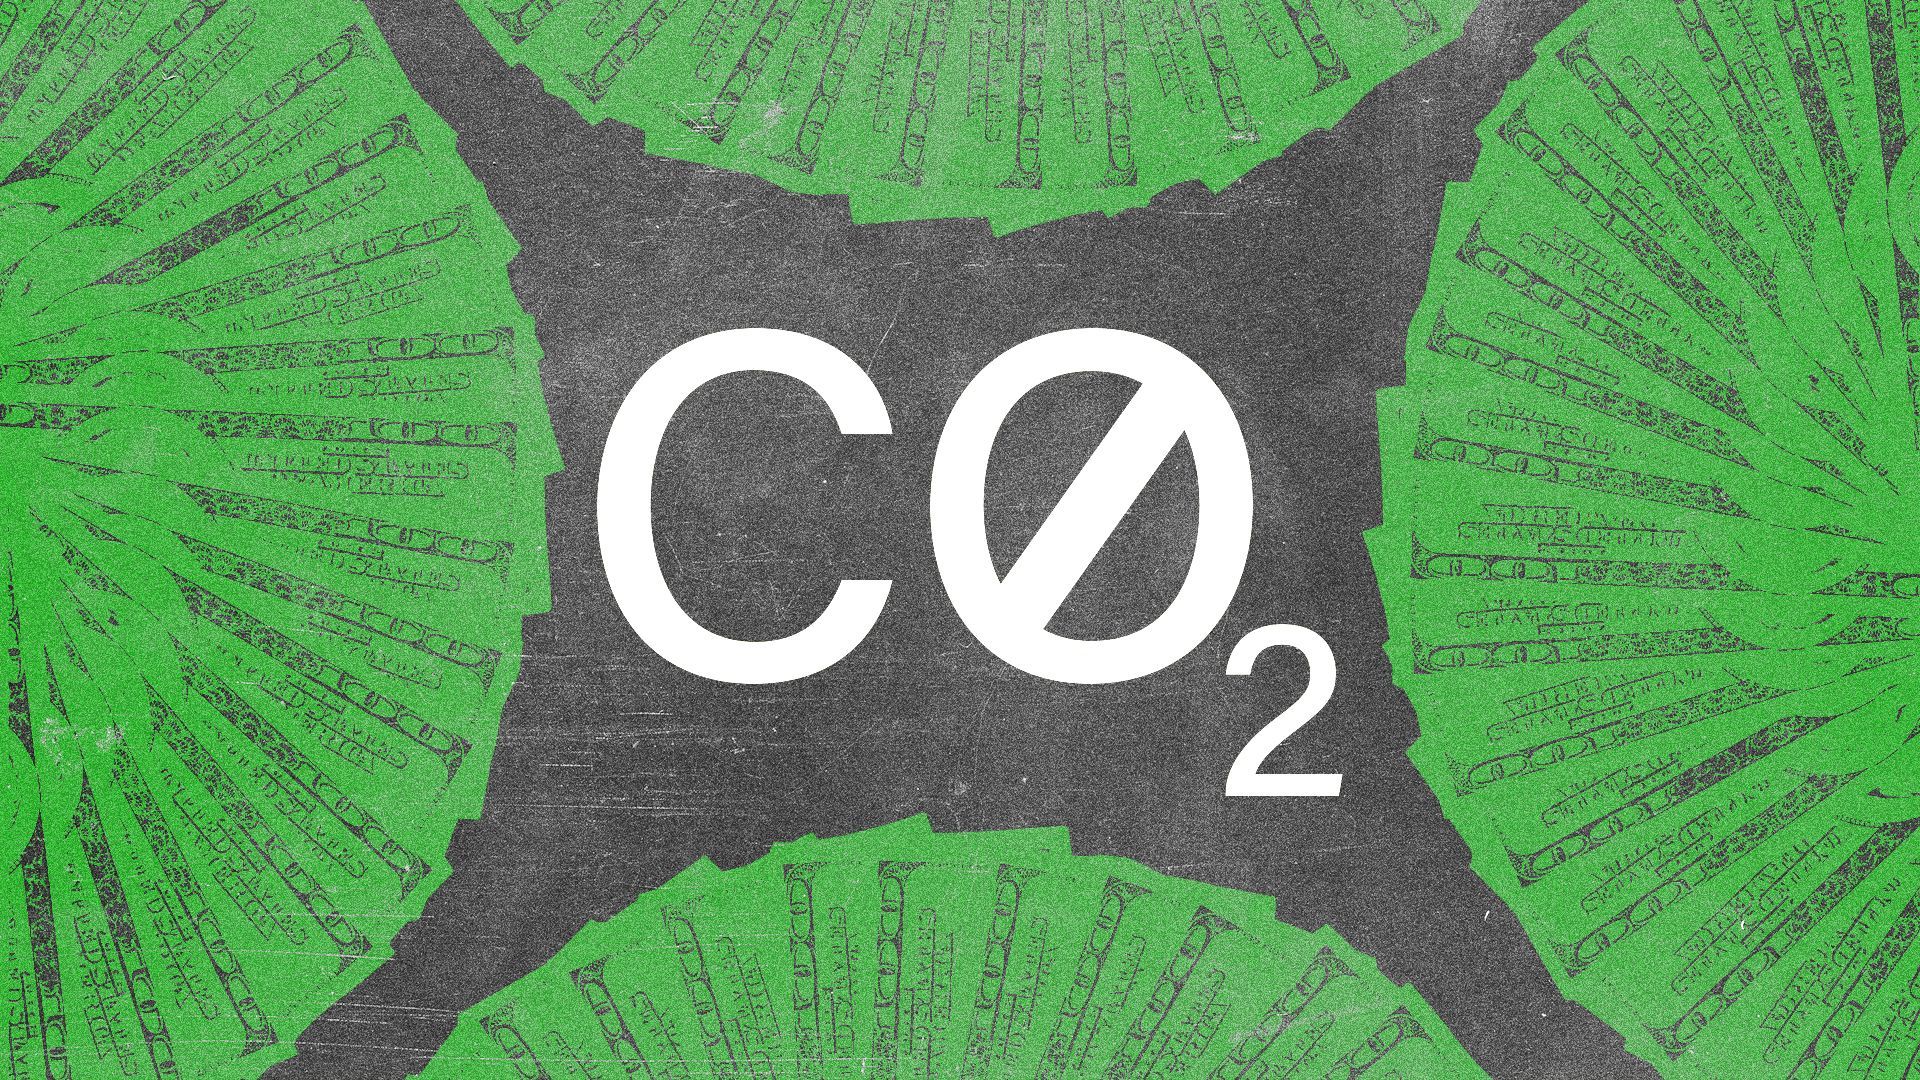 Illustration of the carbon dioxide symbol surrounded by fans of money with the "O" replaced by the no symbol.